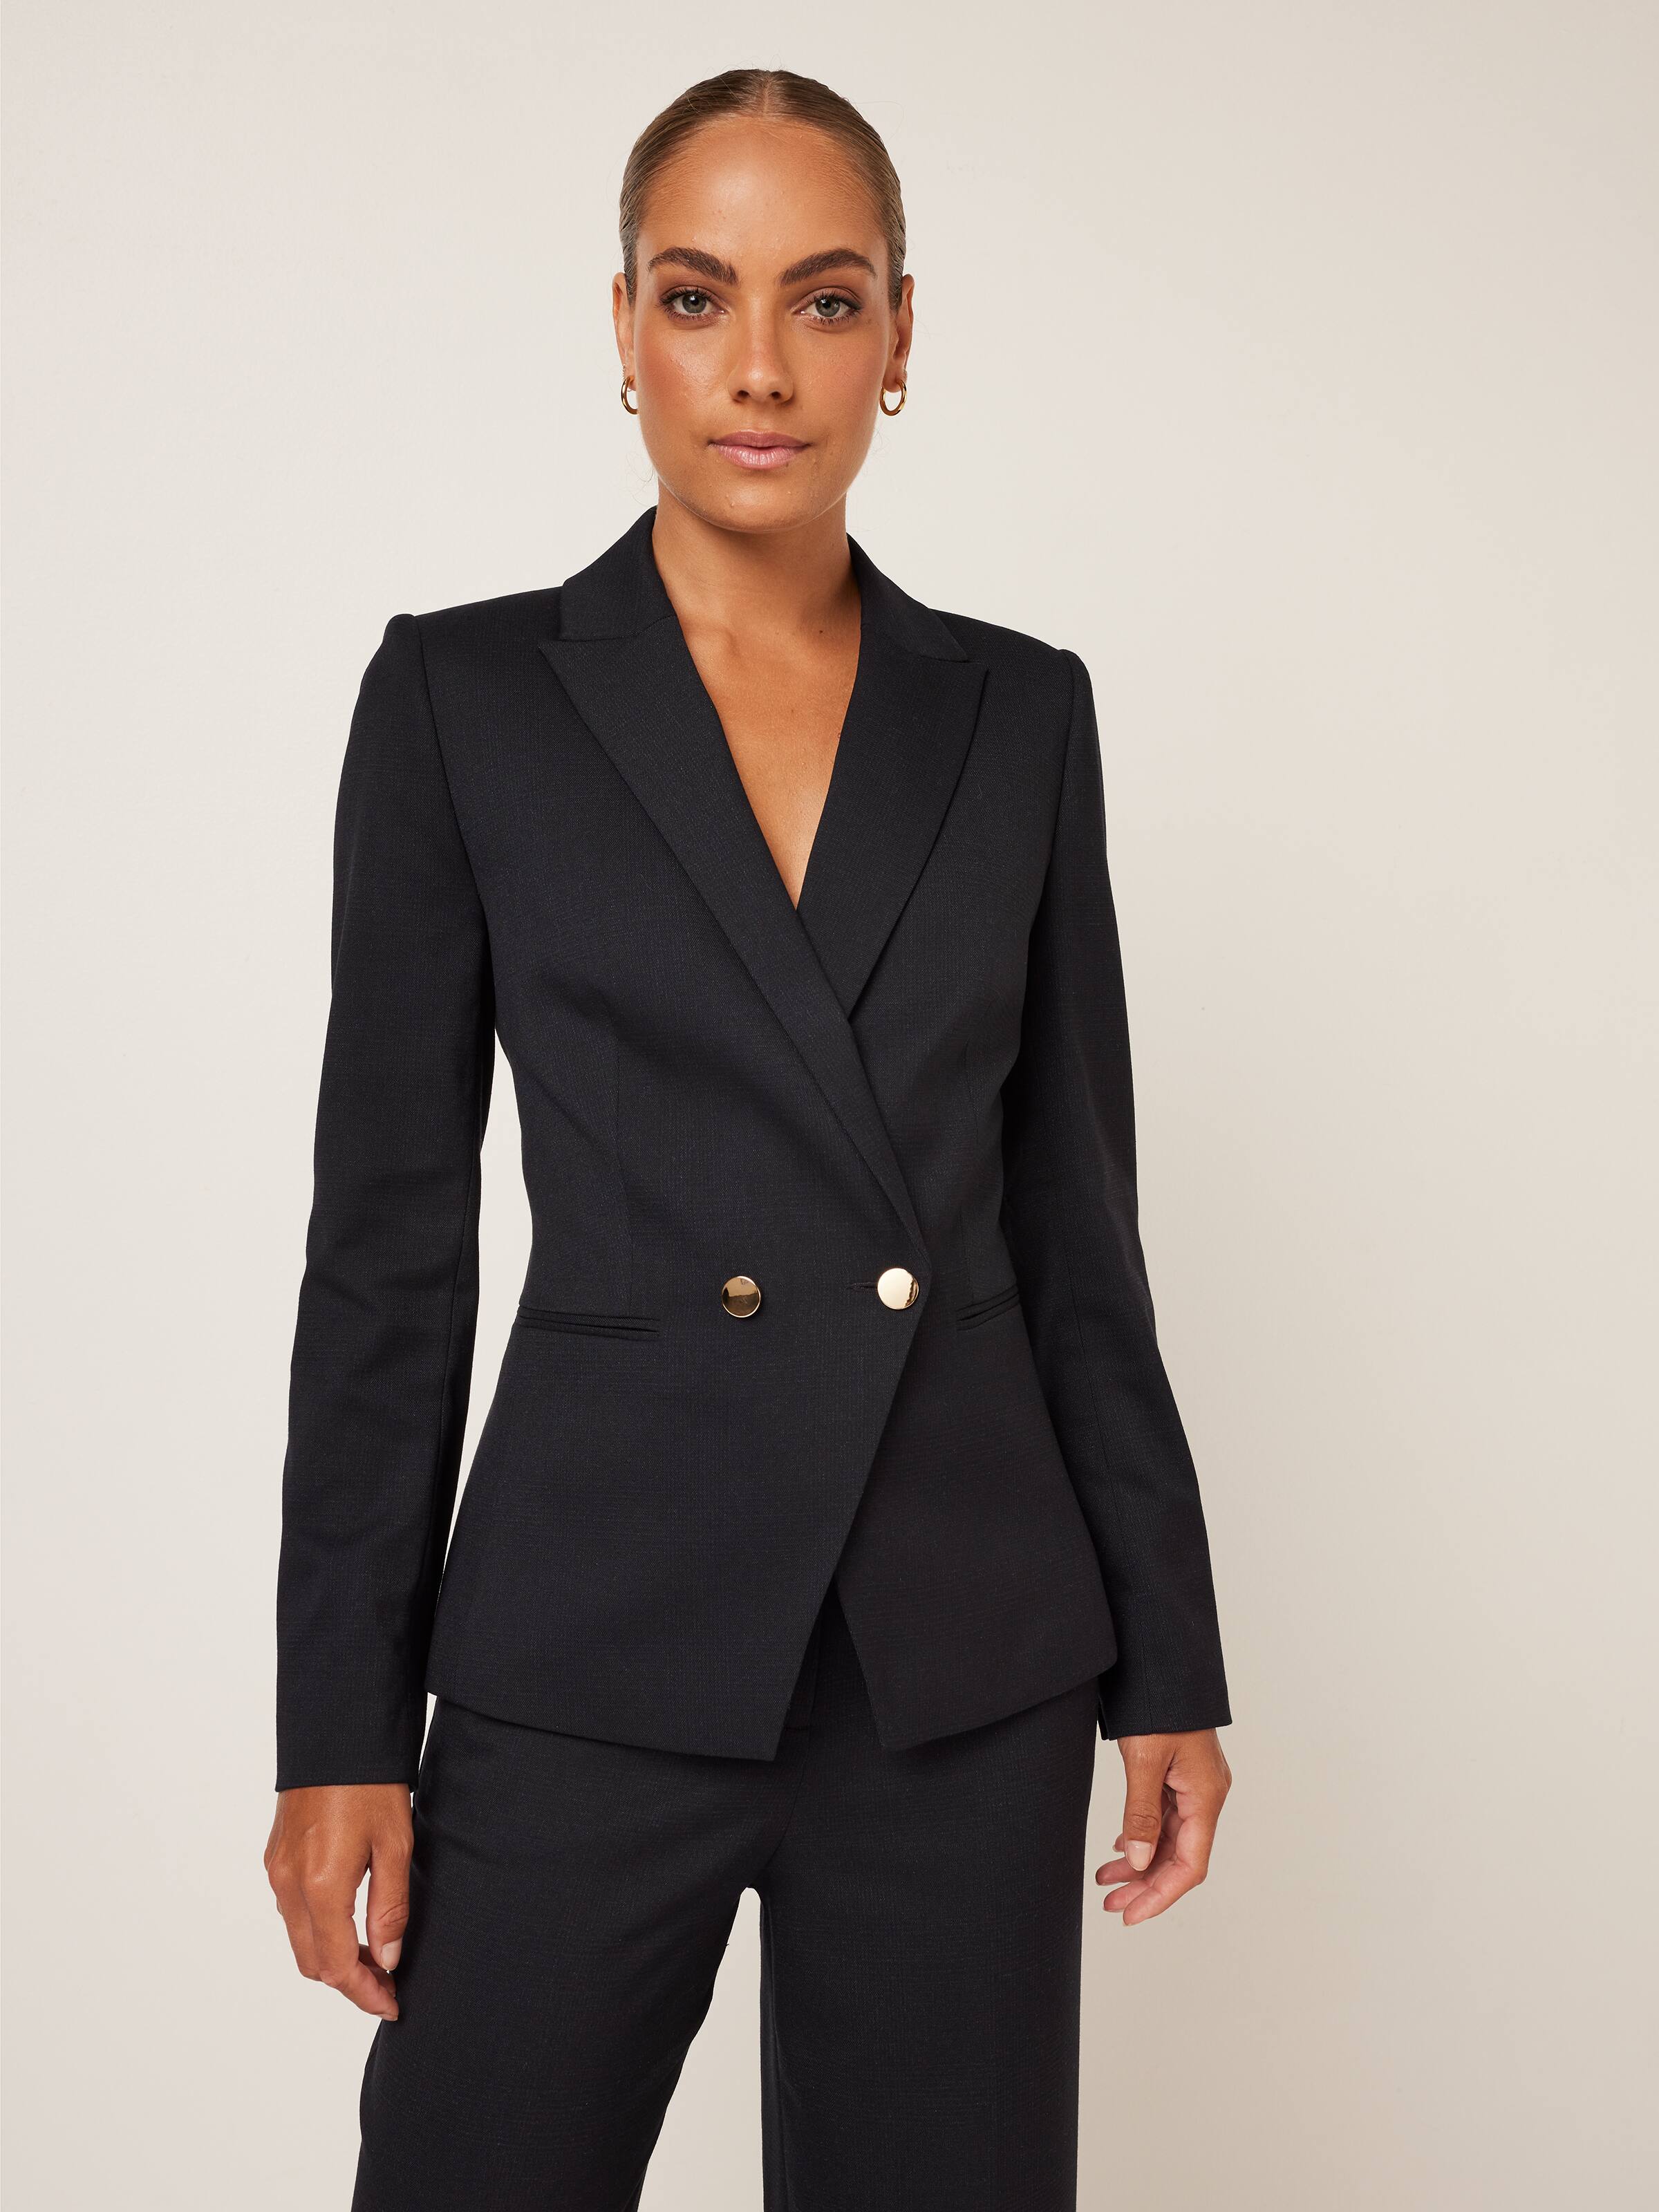 N/A Double Breasted Ladies Business Pant Suit Pink Blue Black